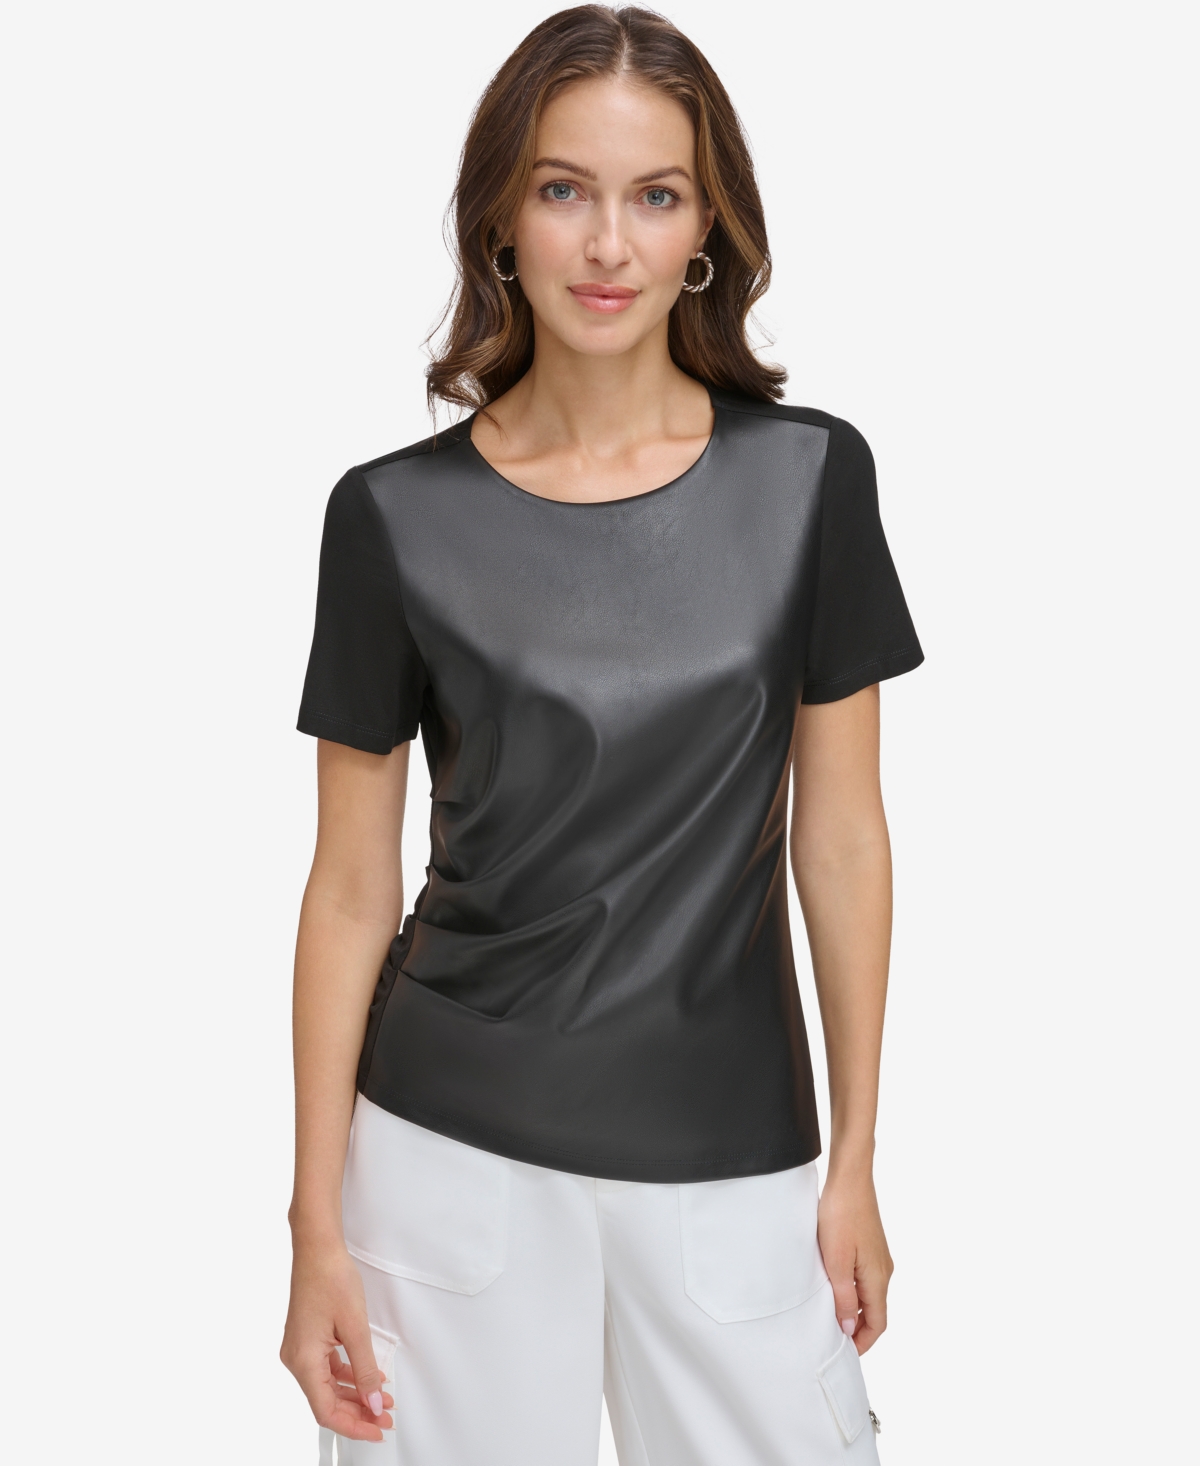 DKNY WOMEN'S MIXED-MEDIA SIDE-RUCHED SHORT-SLEEVE CREWNECK TOP